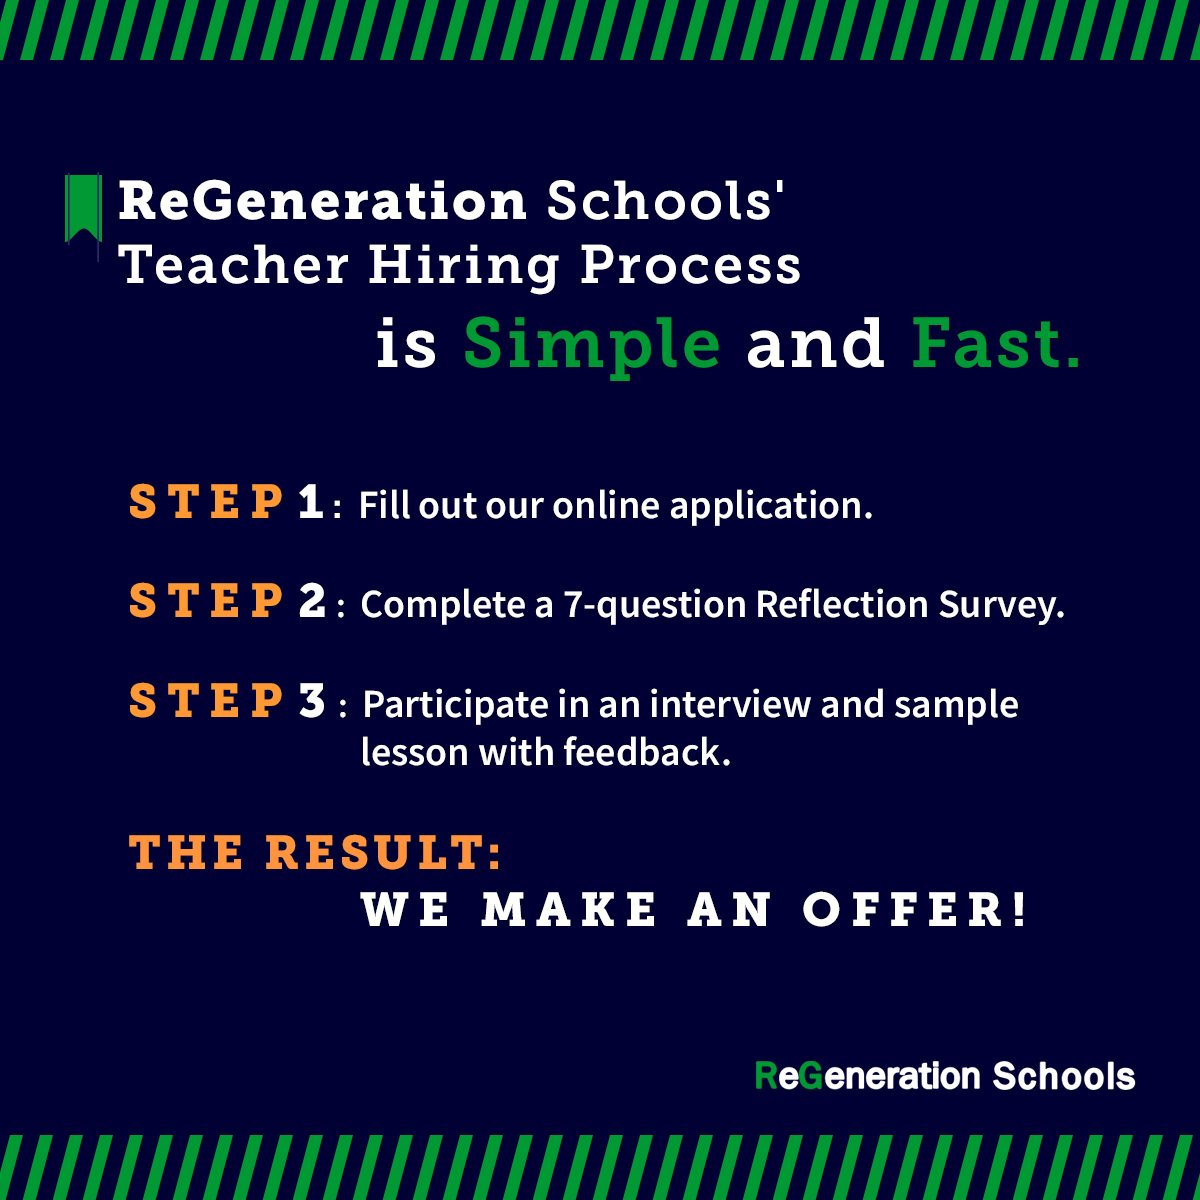 Regeneration Schools Teacher Hiring Process is Simple and Fast. Step 1: Fill out our online application. Step 2: Complete a 7 question reflection survey. Step 3: Participate in an interview and sample lesson with feedback. The Result: We make an offer. Regeneration Schools in Chicago and Cincinnati now hiring teachers and administration.